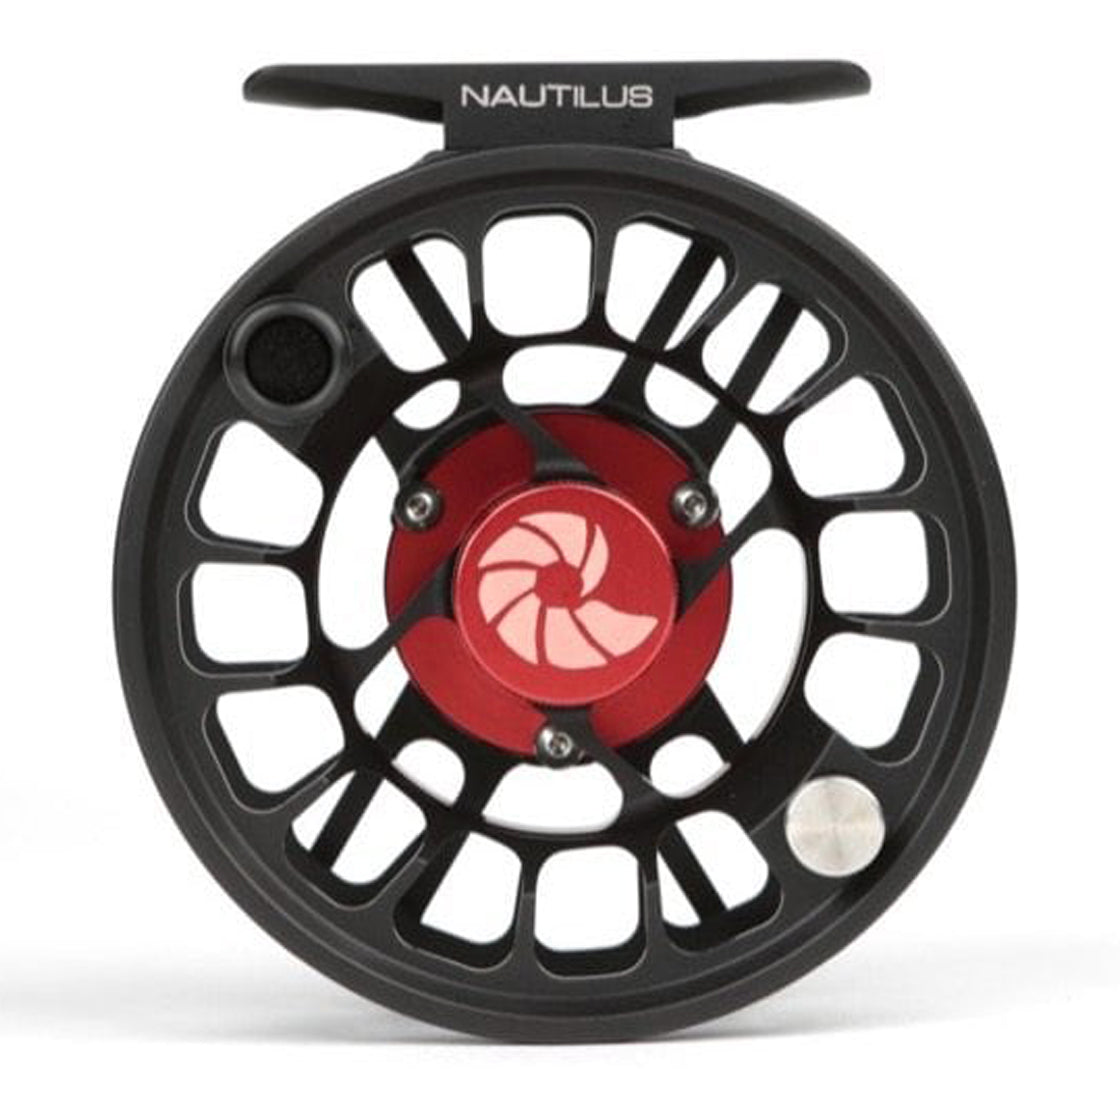 Nautilus X-Series S 2-4wt Fly Reel – Lost Coast Outfitters